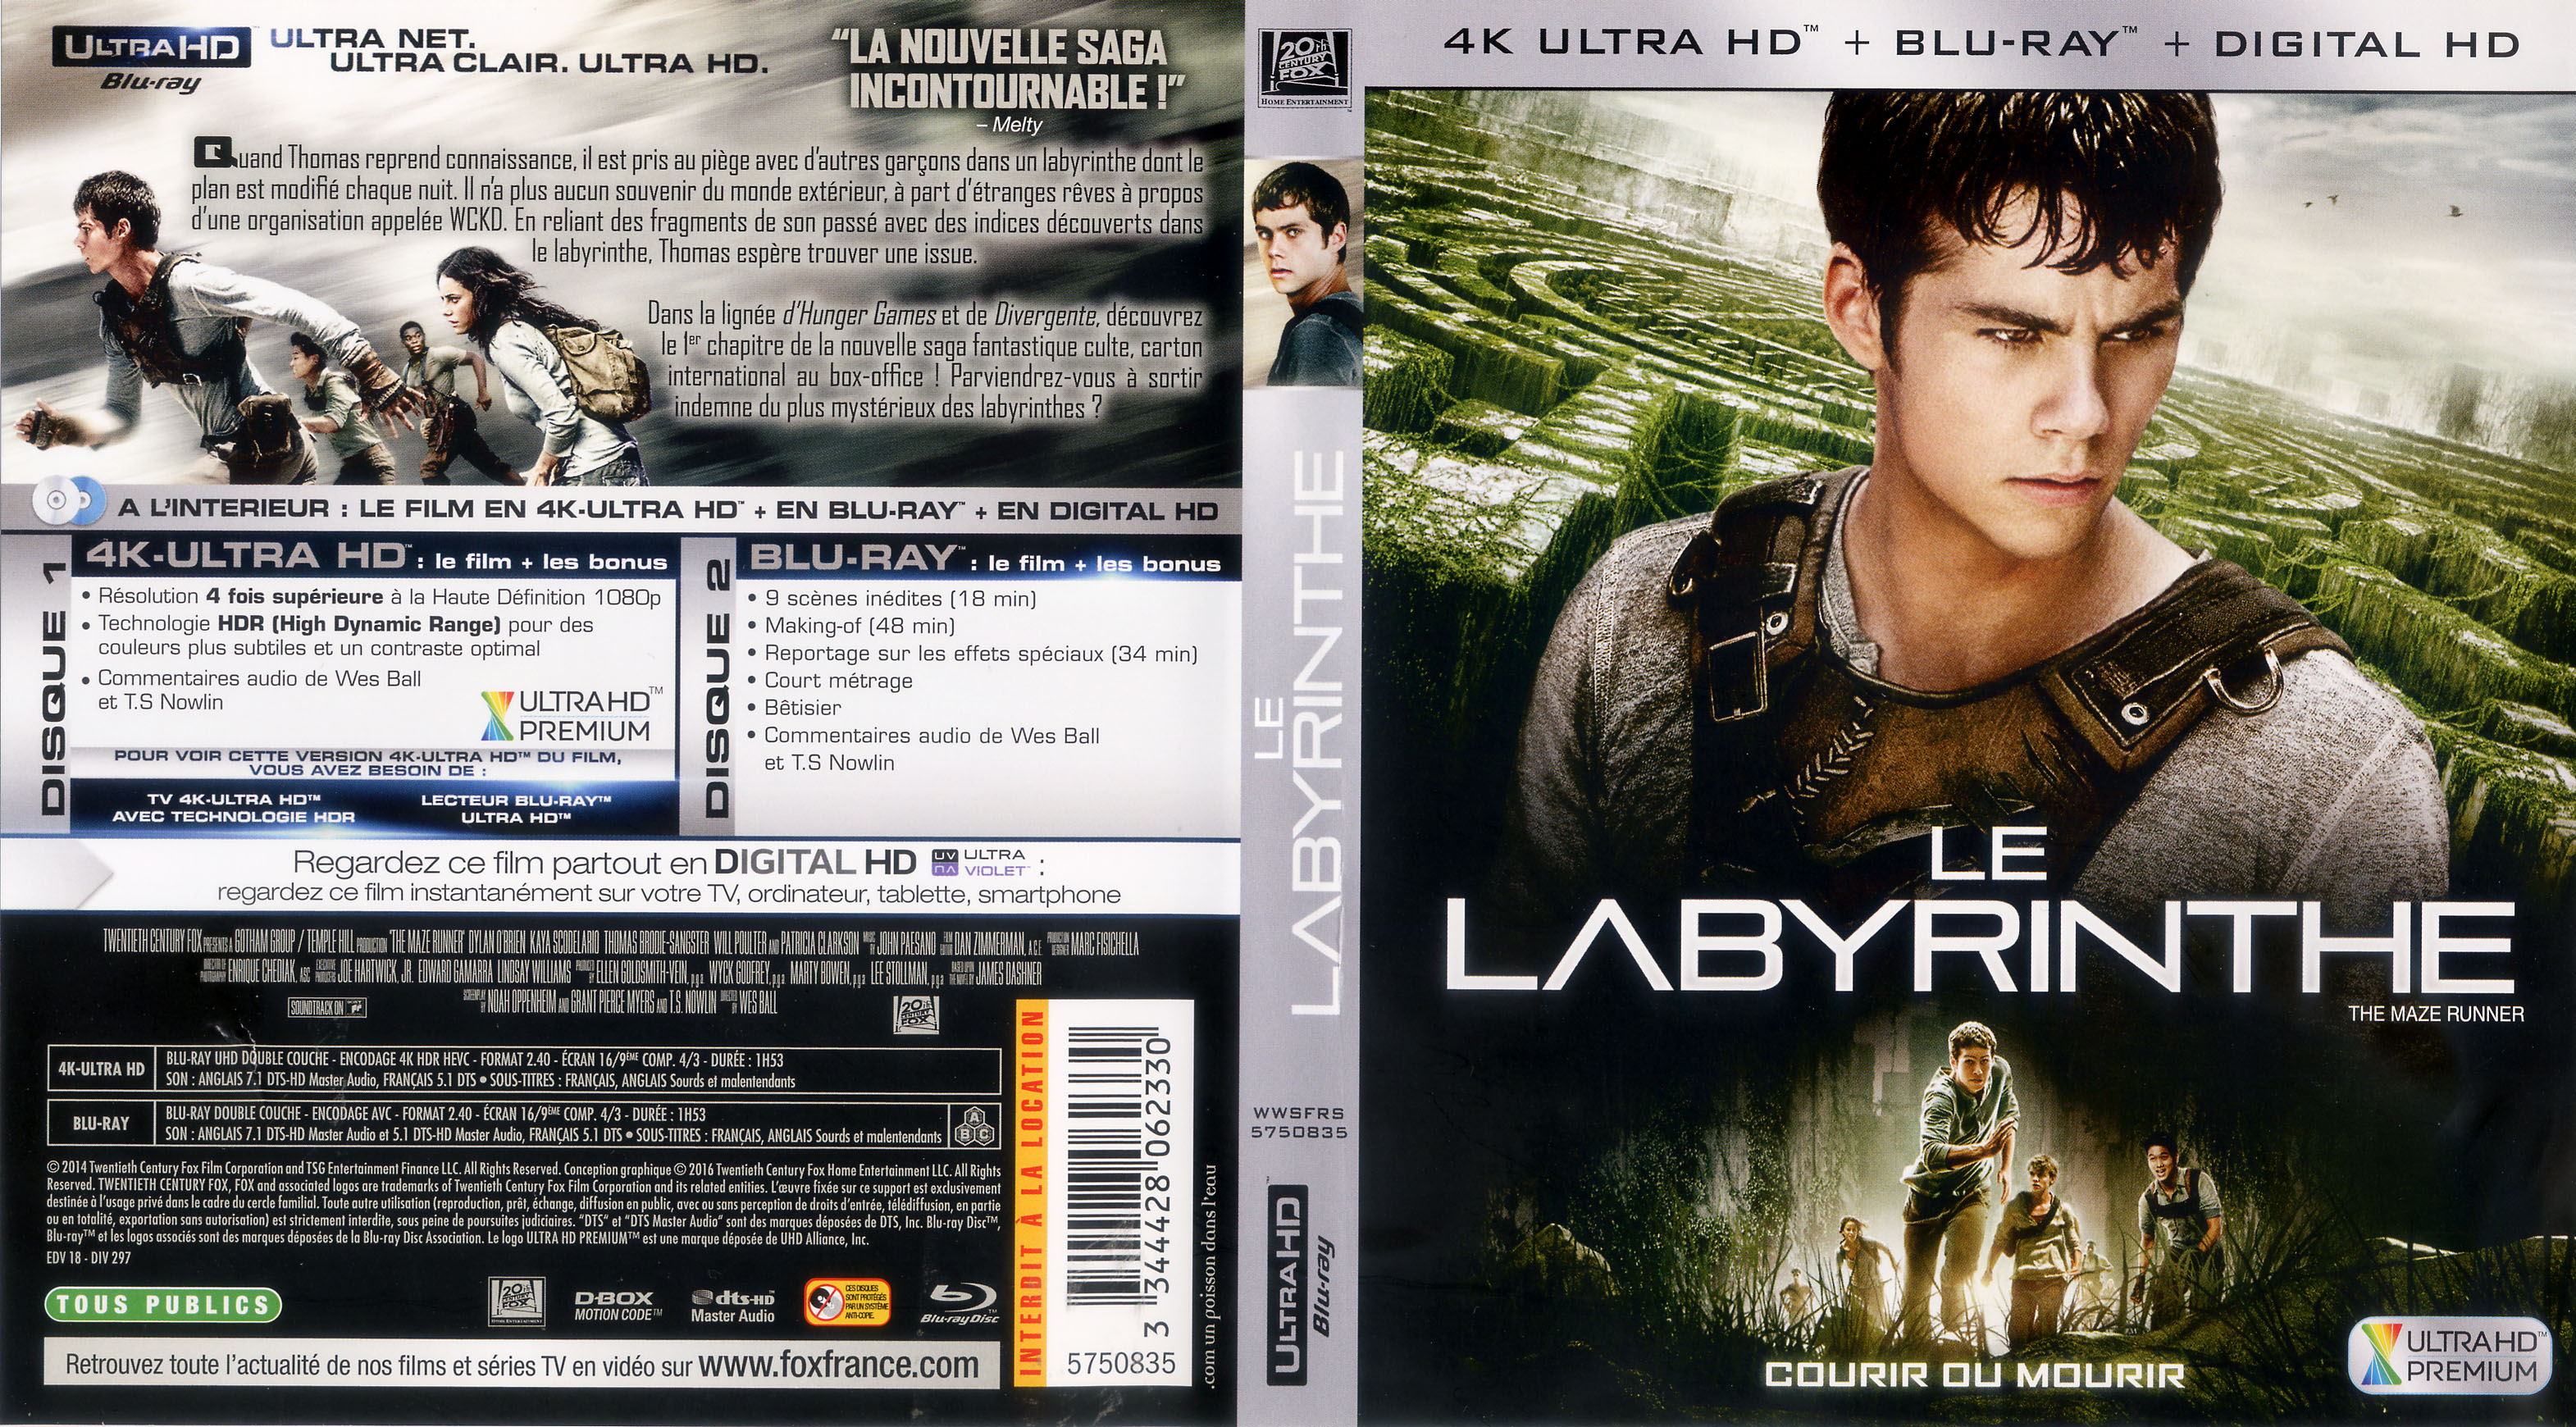 Jaquette DVD Le Labyrinthe 4K (BLU-RAY)